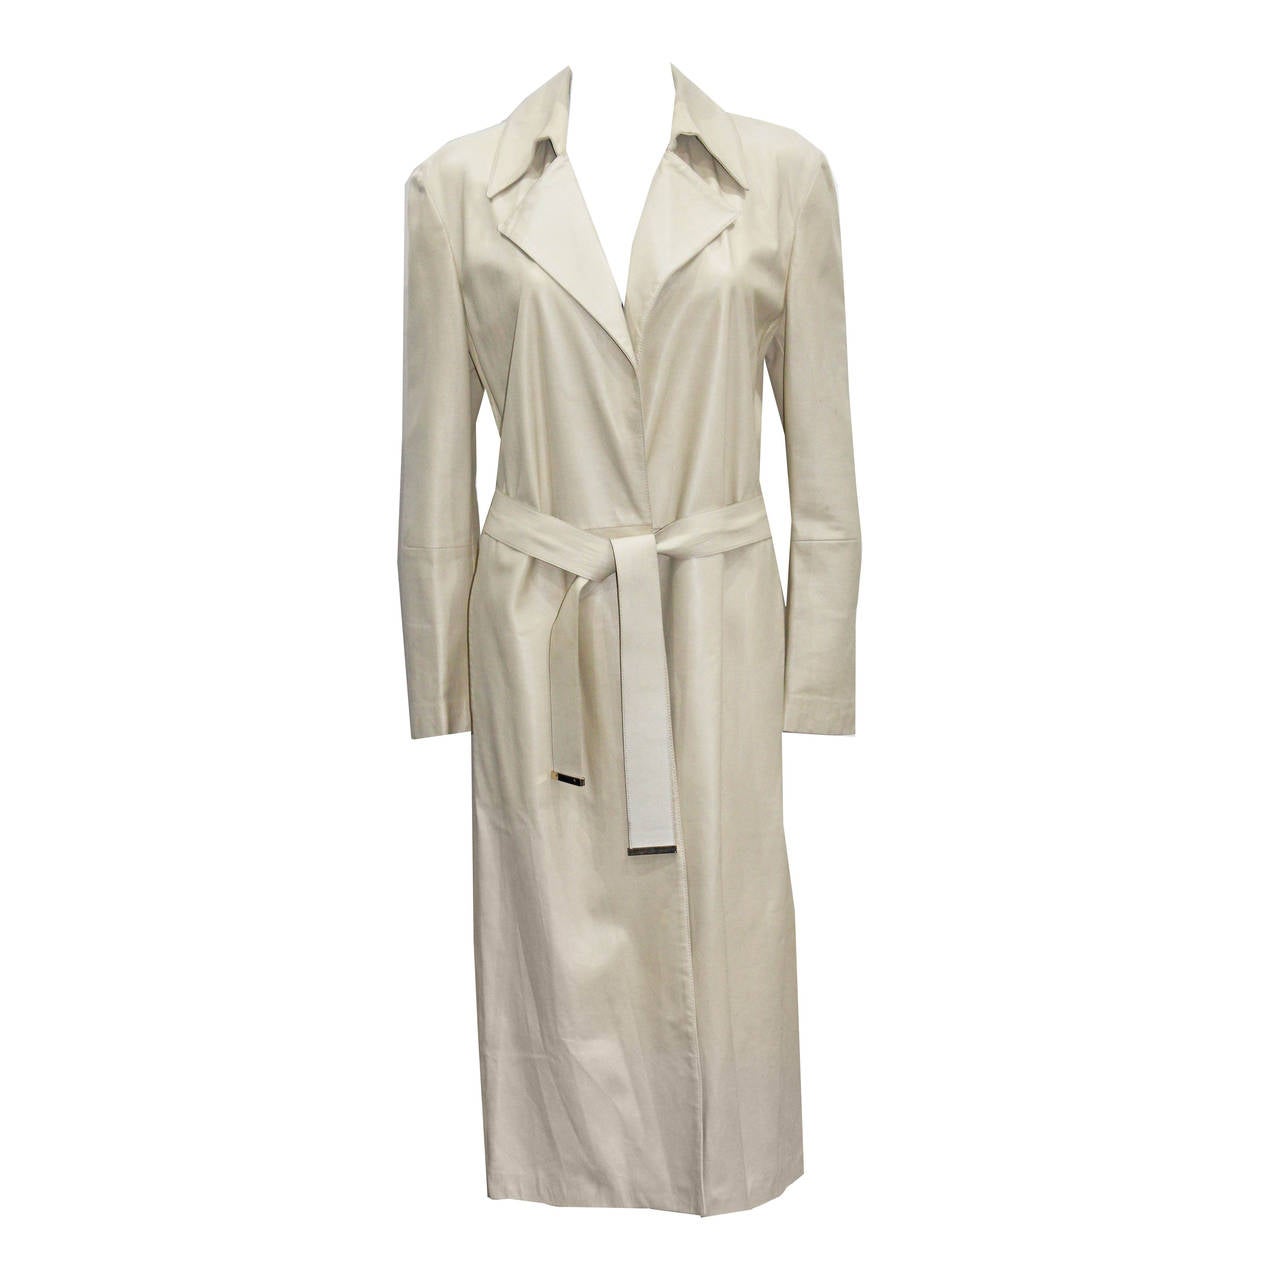 1990s Tom Ford for Gucci Cream Leather Coat